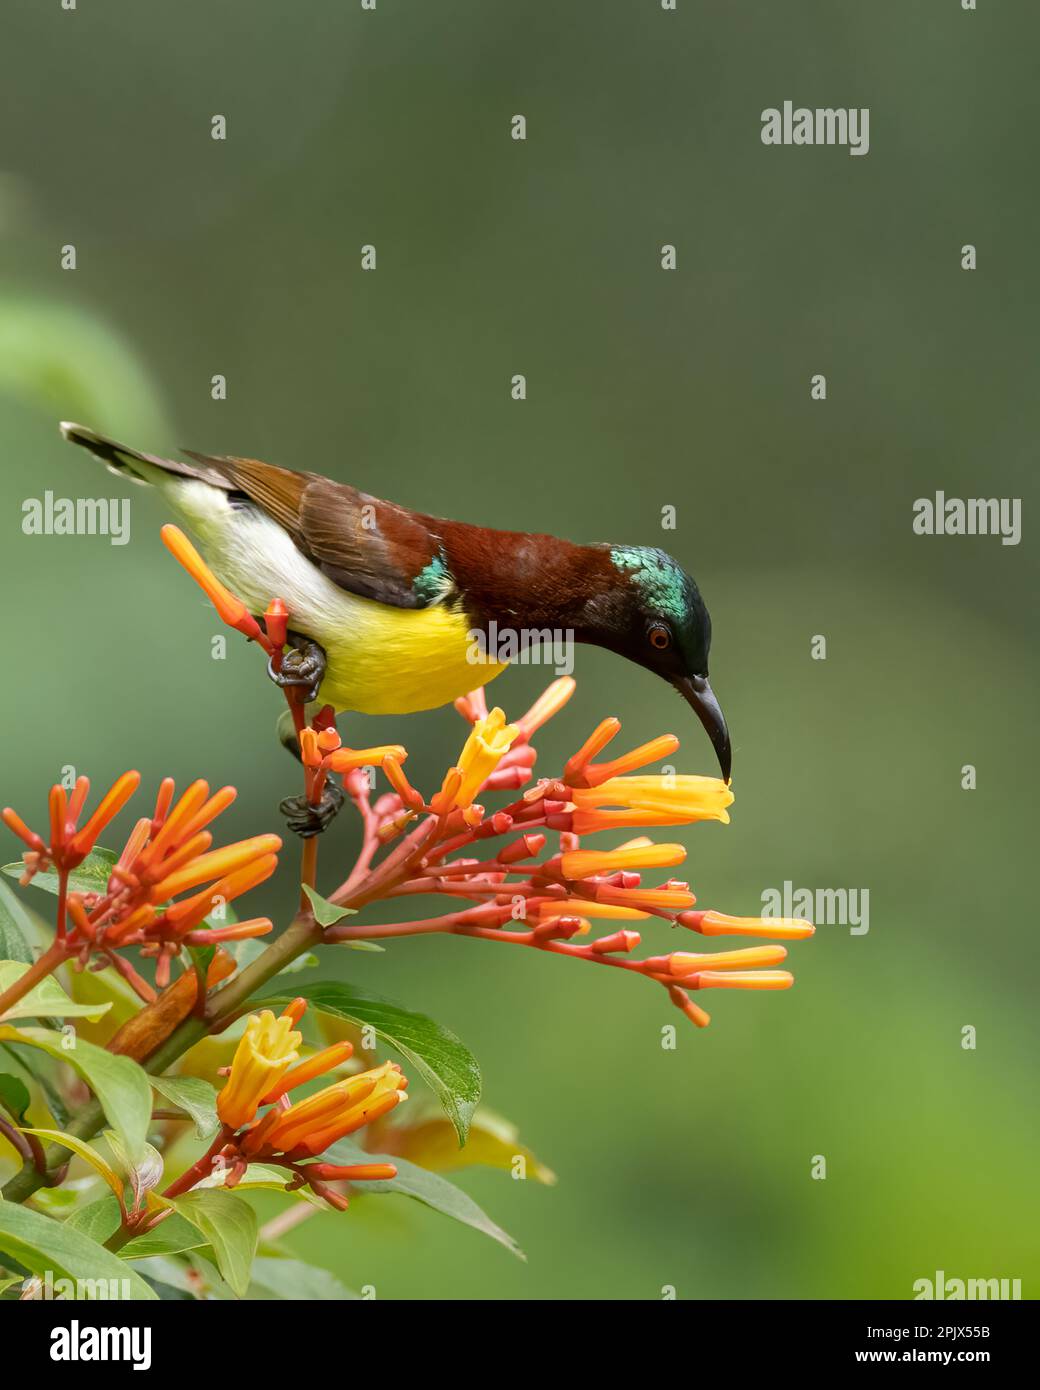 close up of a colorful male purple-rumped sunbird (Leptocoma zeylonica), feeding on nectar from the firebush flowers in the garden. Stock Photo